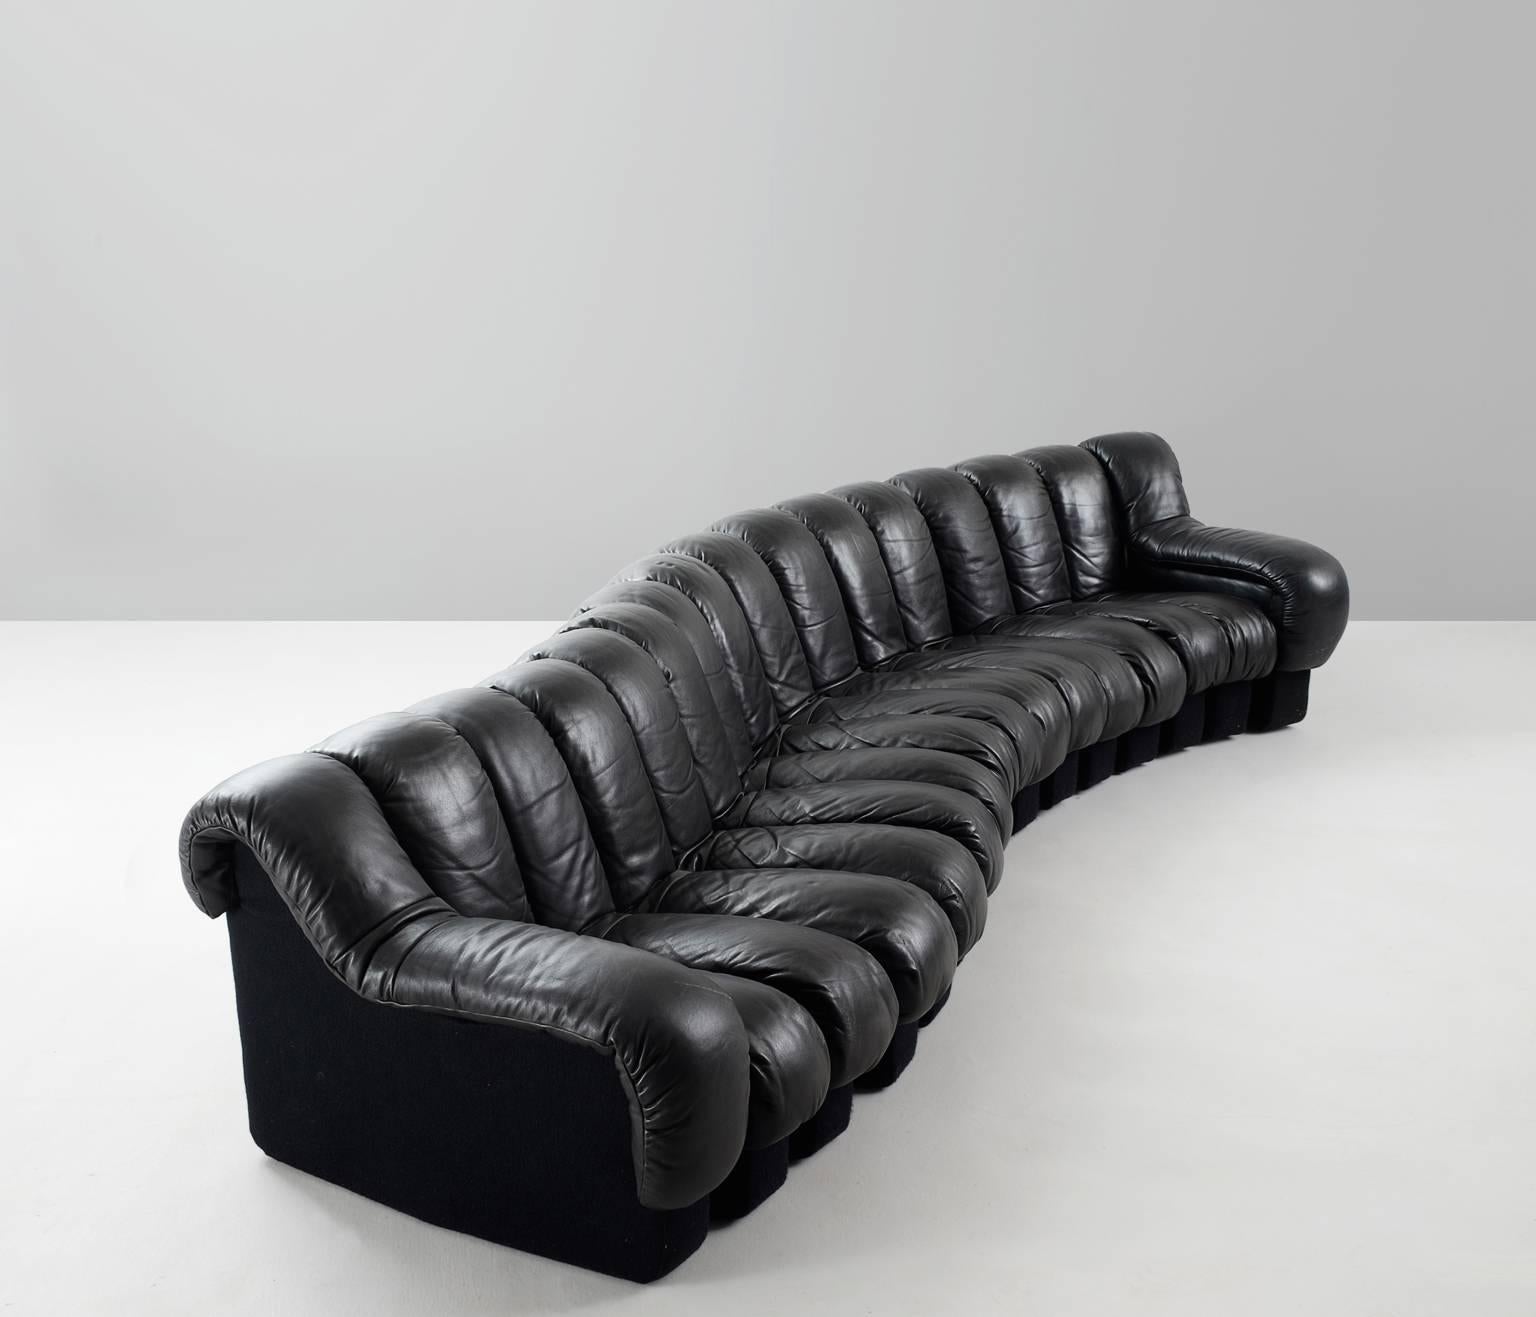 De Sede ‘Snake’ DS-600, black leather and felt, Switzerland, 1972. 

De Sede 'Non Stop' sectional sofa containing 16 pieces in original black leather and black felt back. 14 centerpieces and two armrests. 

A design by Ueli Berger, Elenora